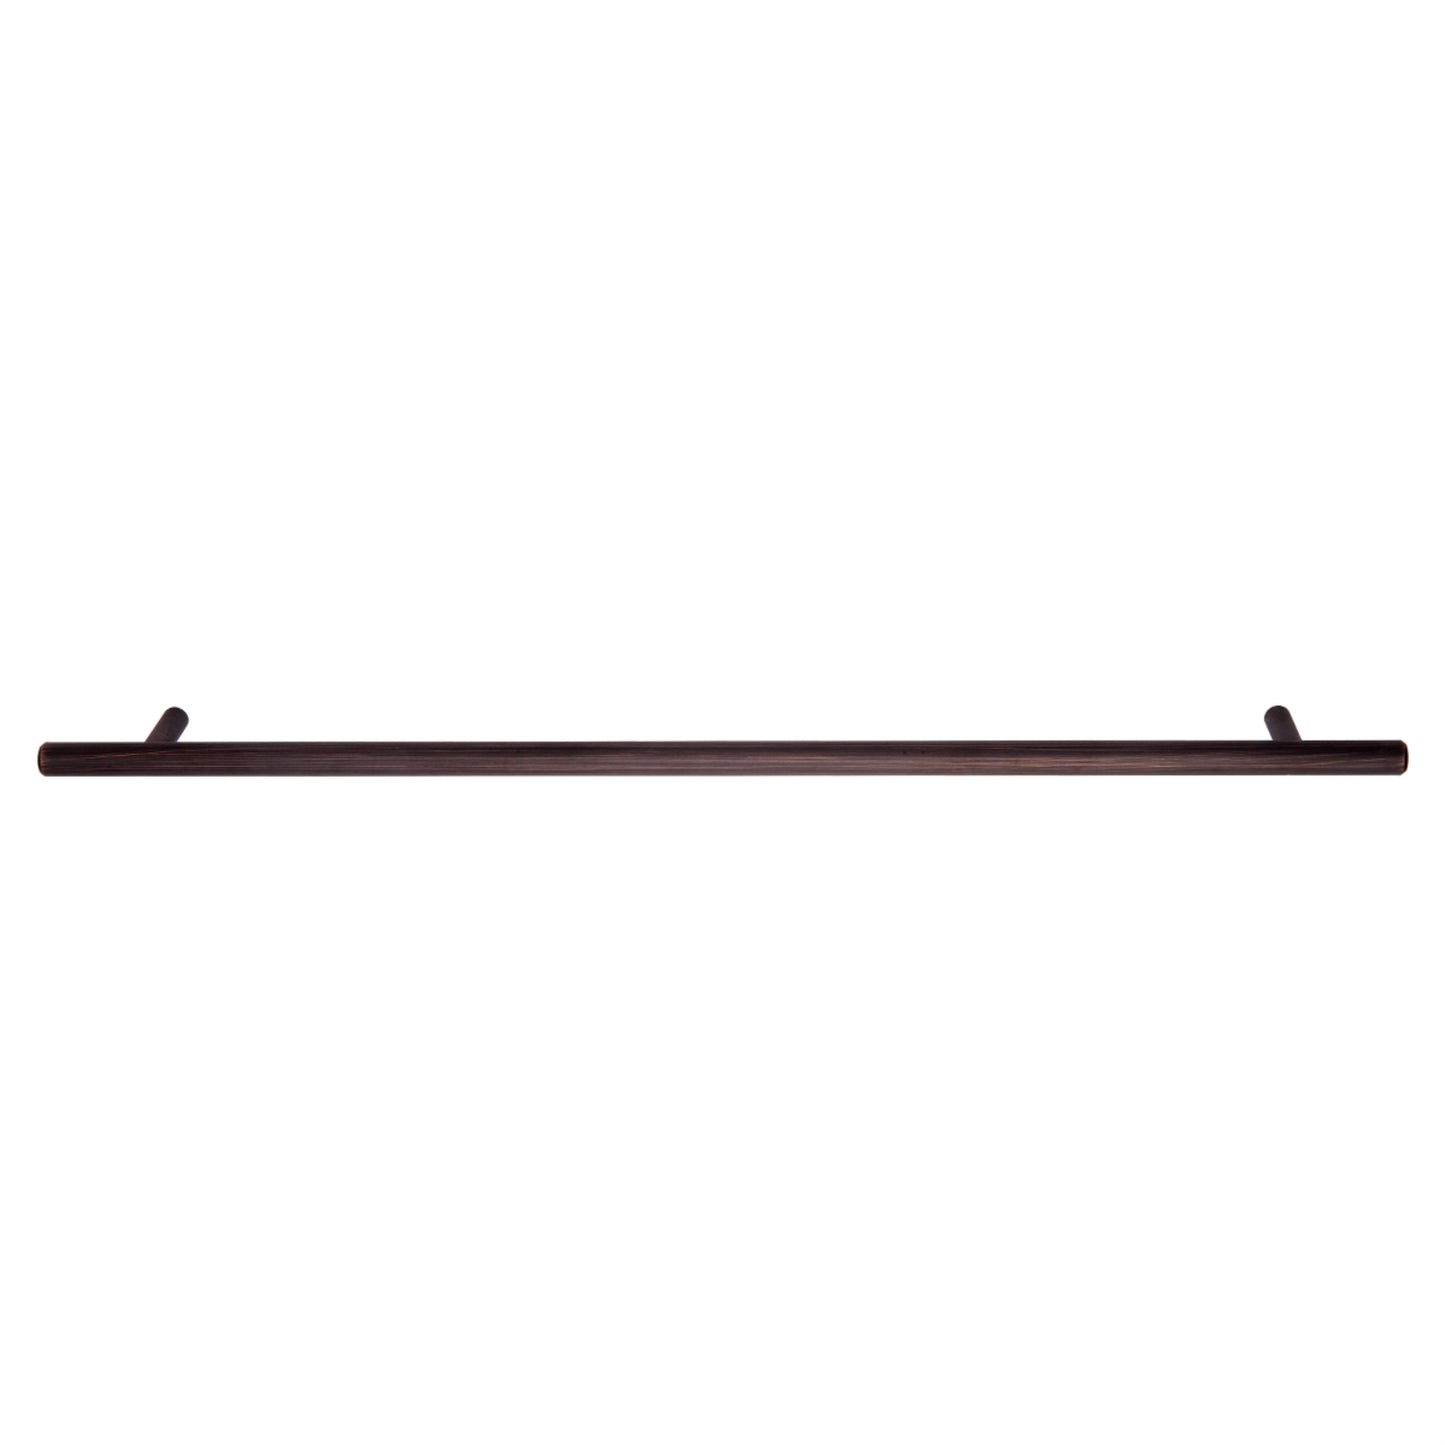 South Main Hardware Euro Bar Cabinet Handle (3/8" Diameter), 15" Length (12.63" Hole Center), Oil Rubbed Bronze, 10-Pack